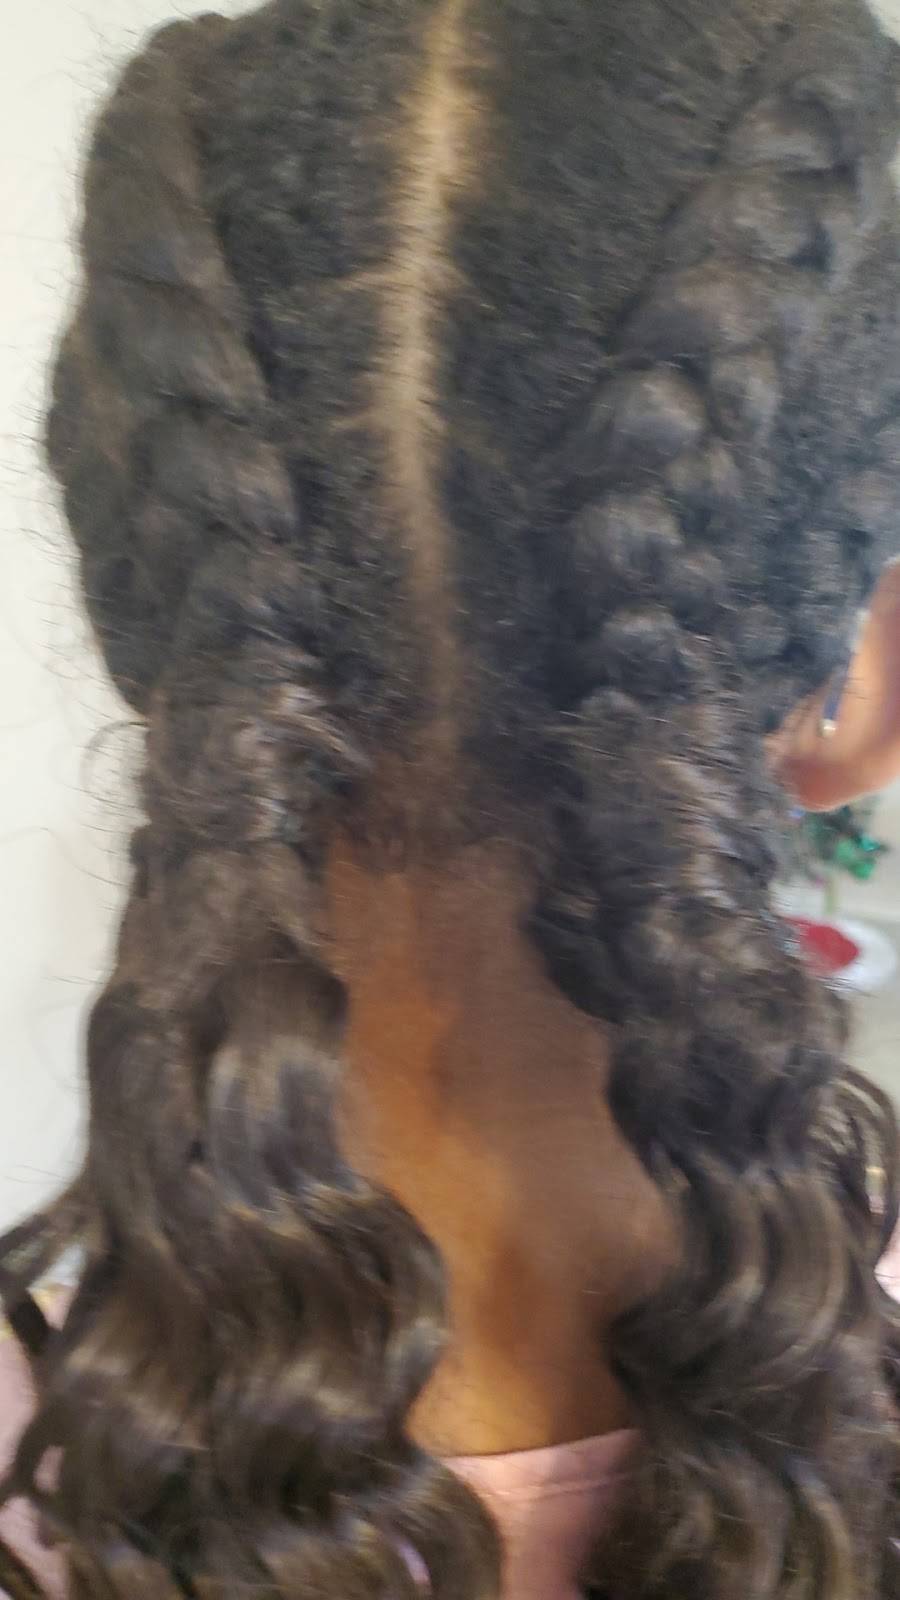 Salima African Hair Braiding & Beauty Cuts | 1100 Grand Ave Pkwy #106, Pflugerville, TX 78660 | Phone: (512) 299-5642